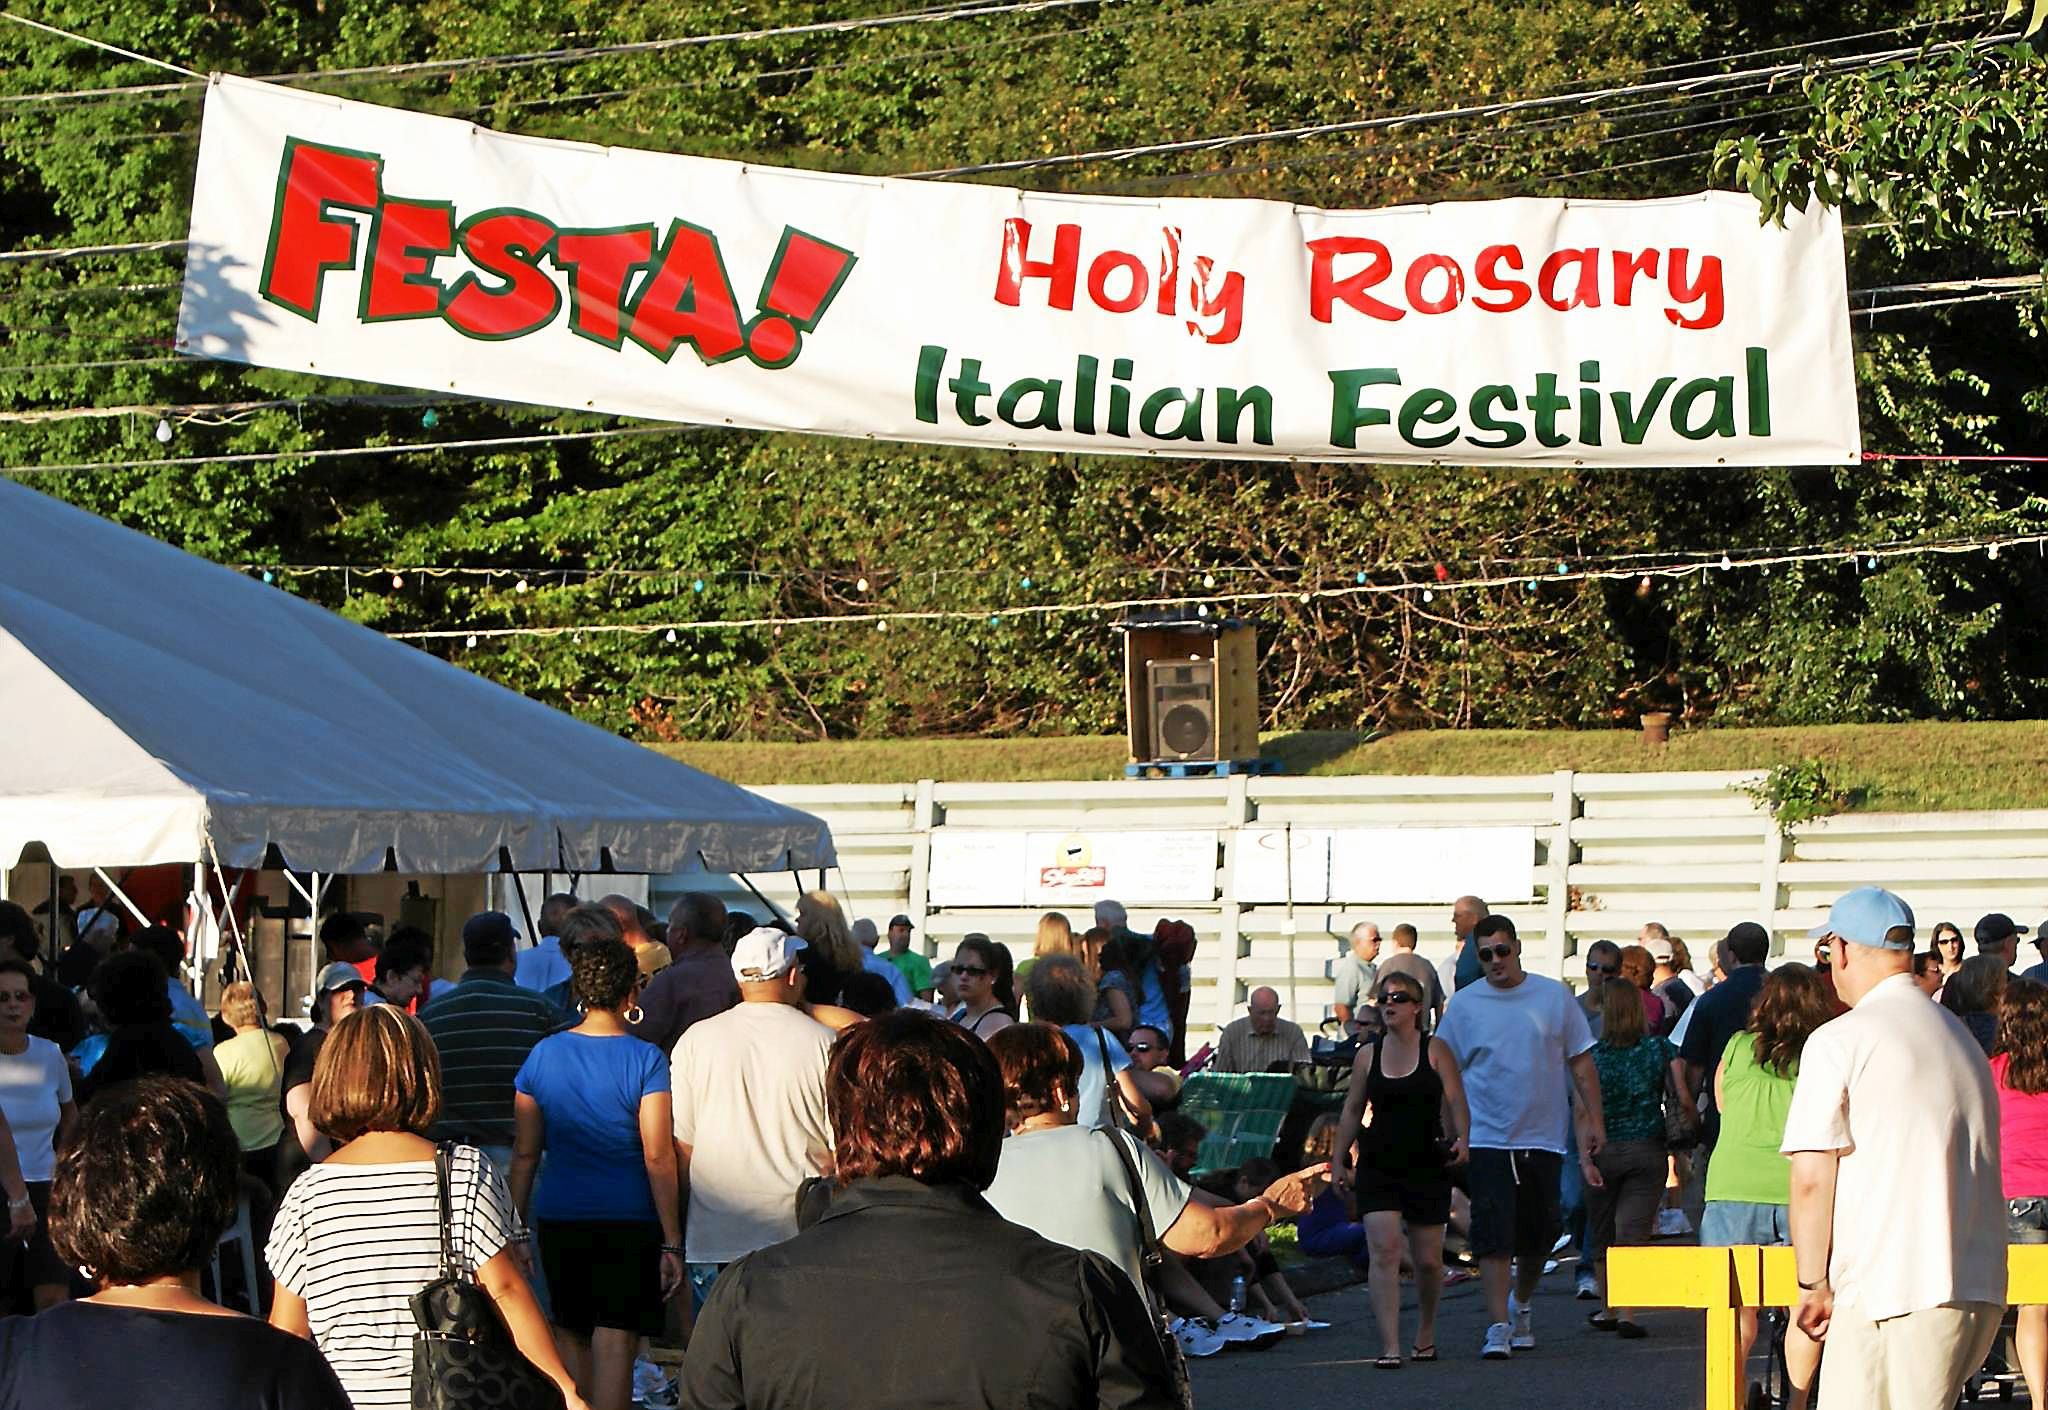 Holy Rosary Church in Ansonia gears up for the 48th Italian Festival